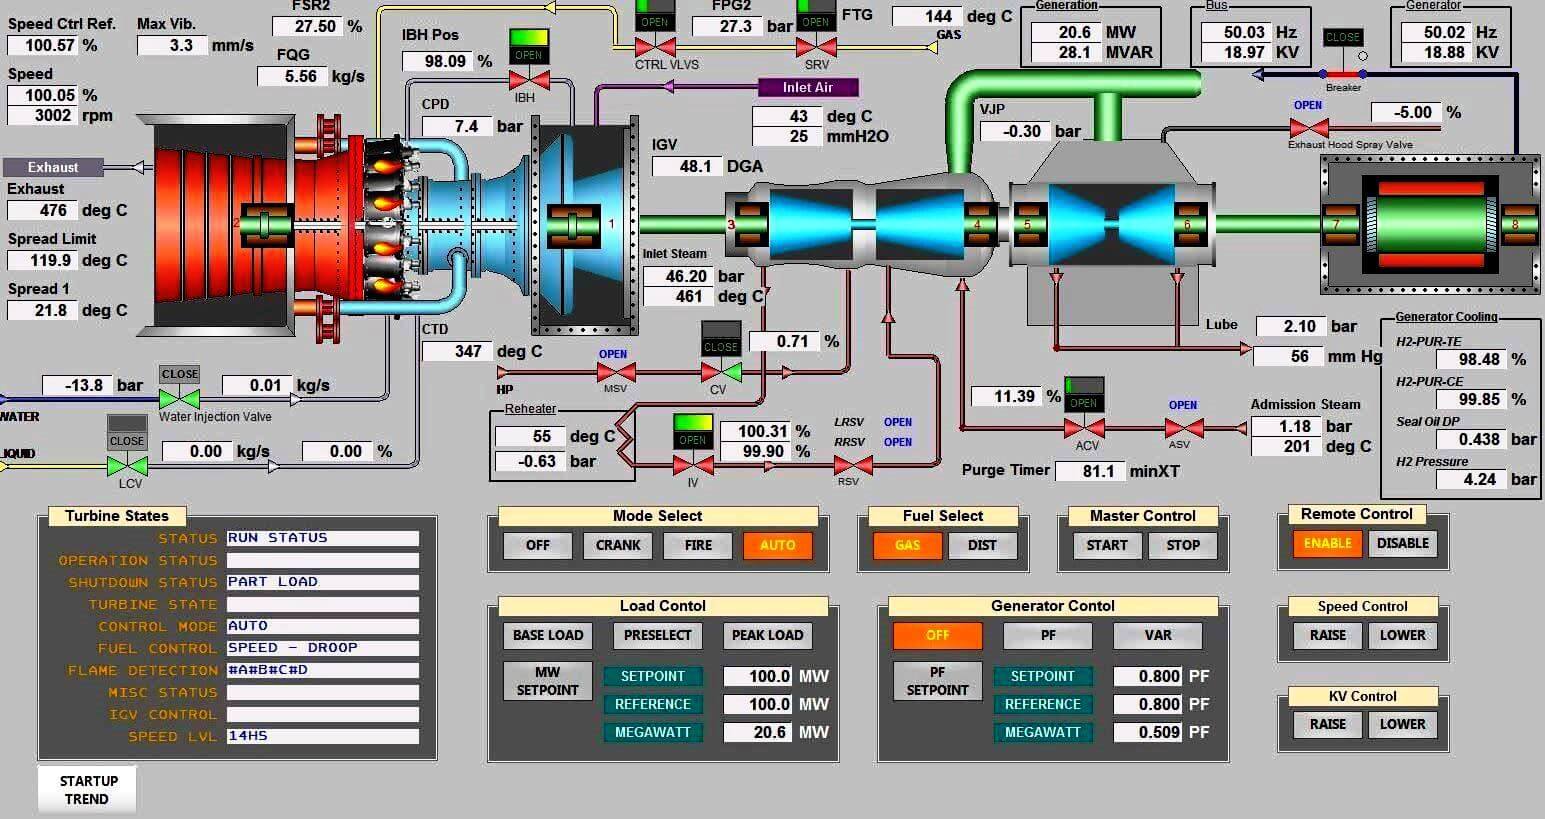 scada and distributed control system